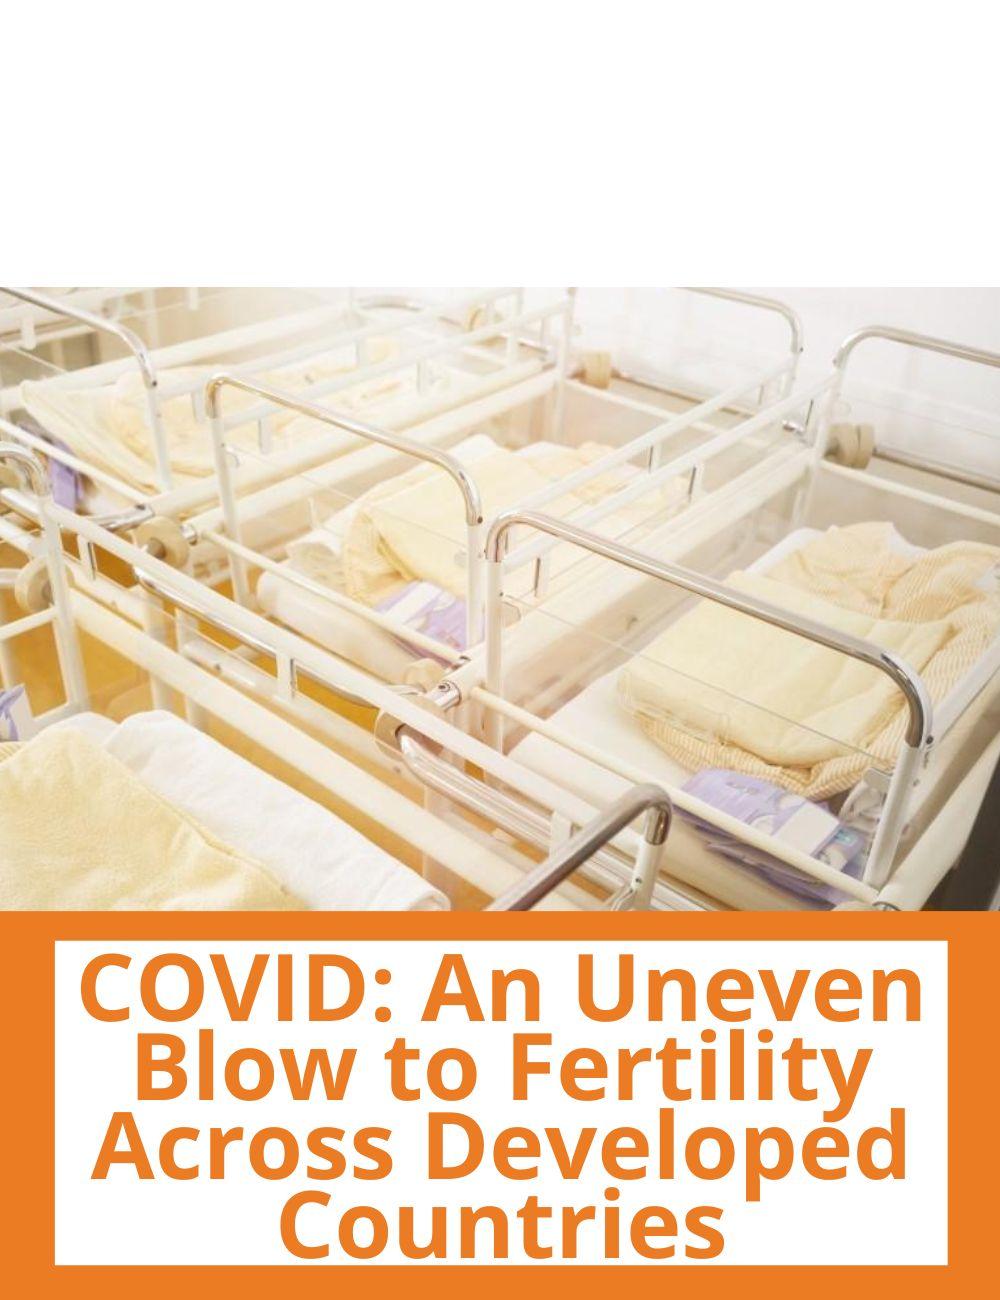 Link to related stories. Image: hospital bassinets. Story headline: COVID: An Uneven Blow to Fertility Across Developed Countries